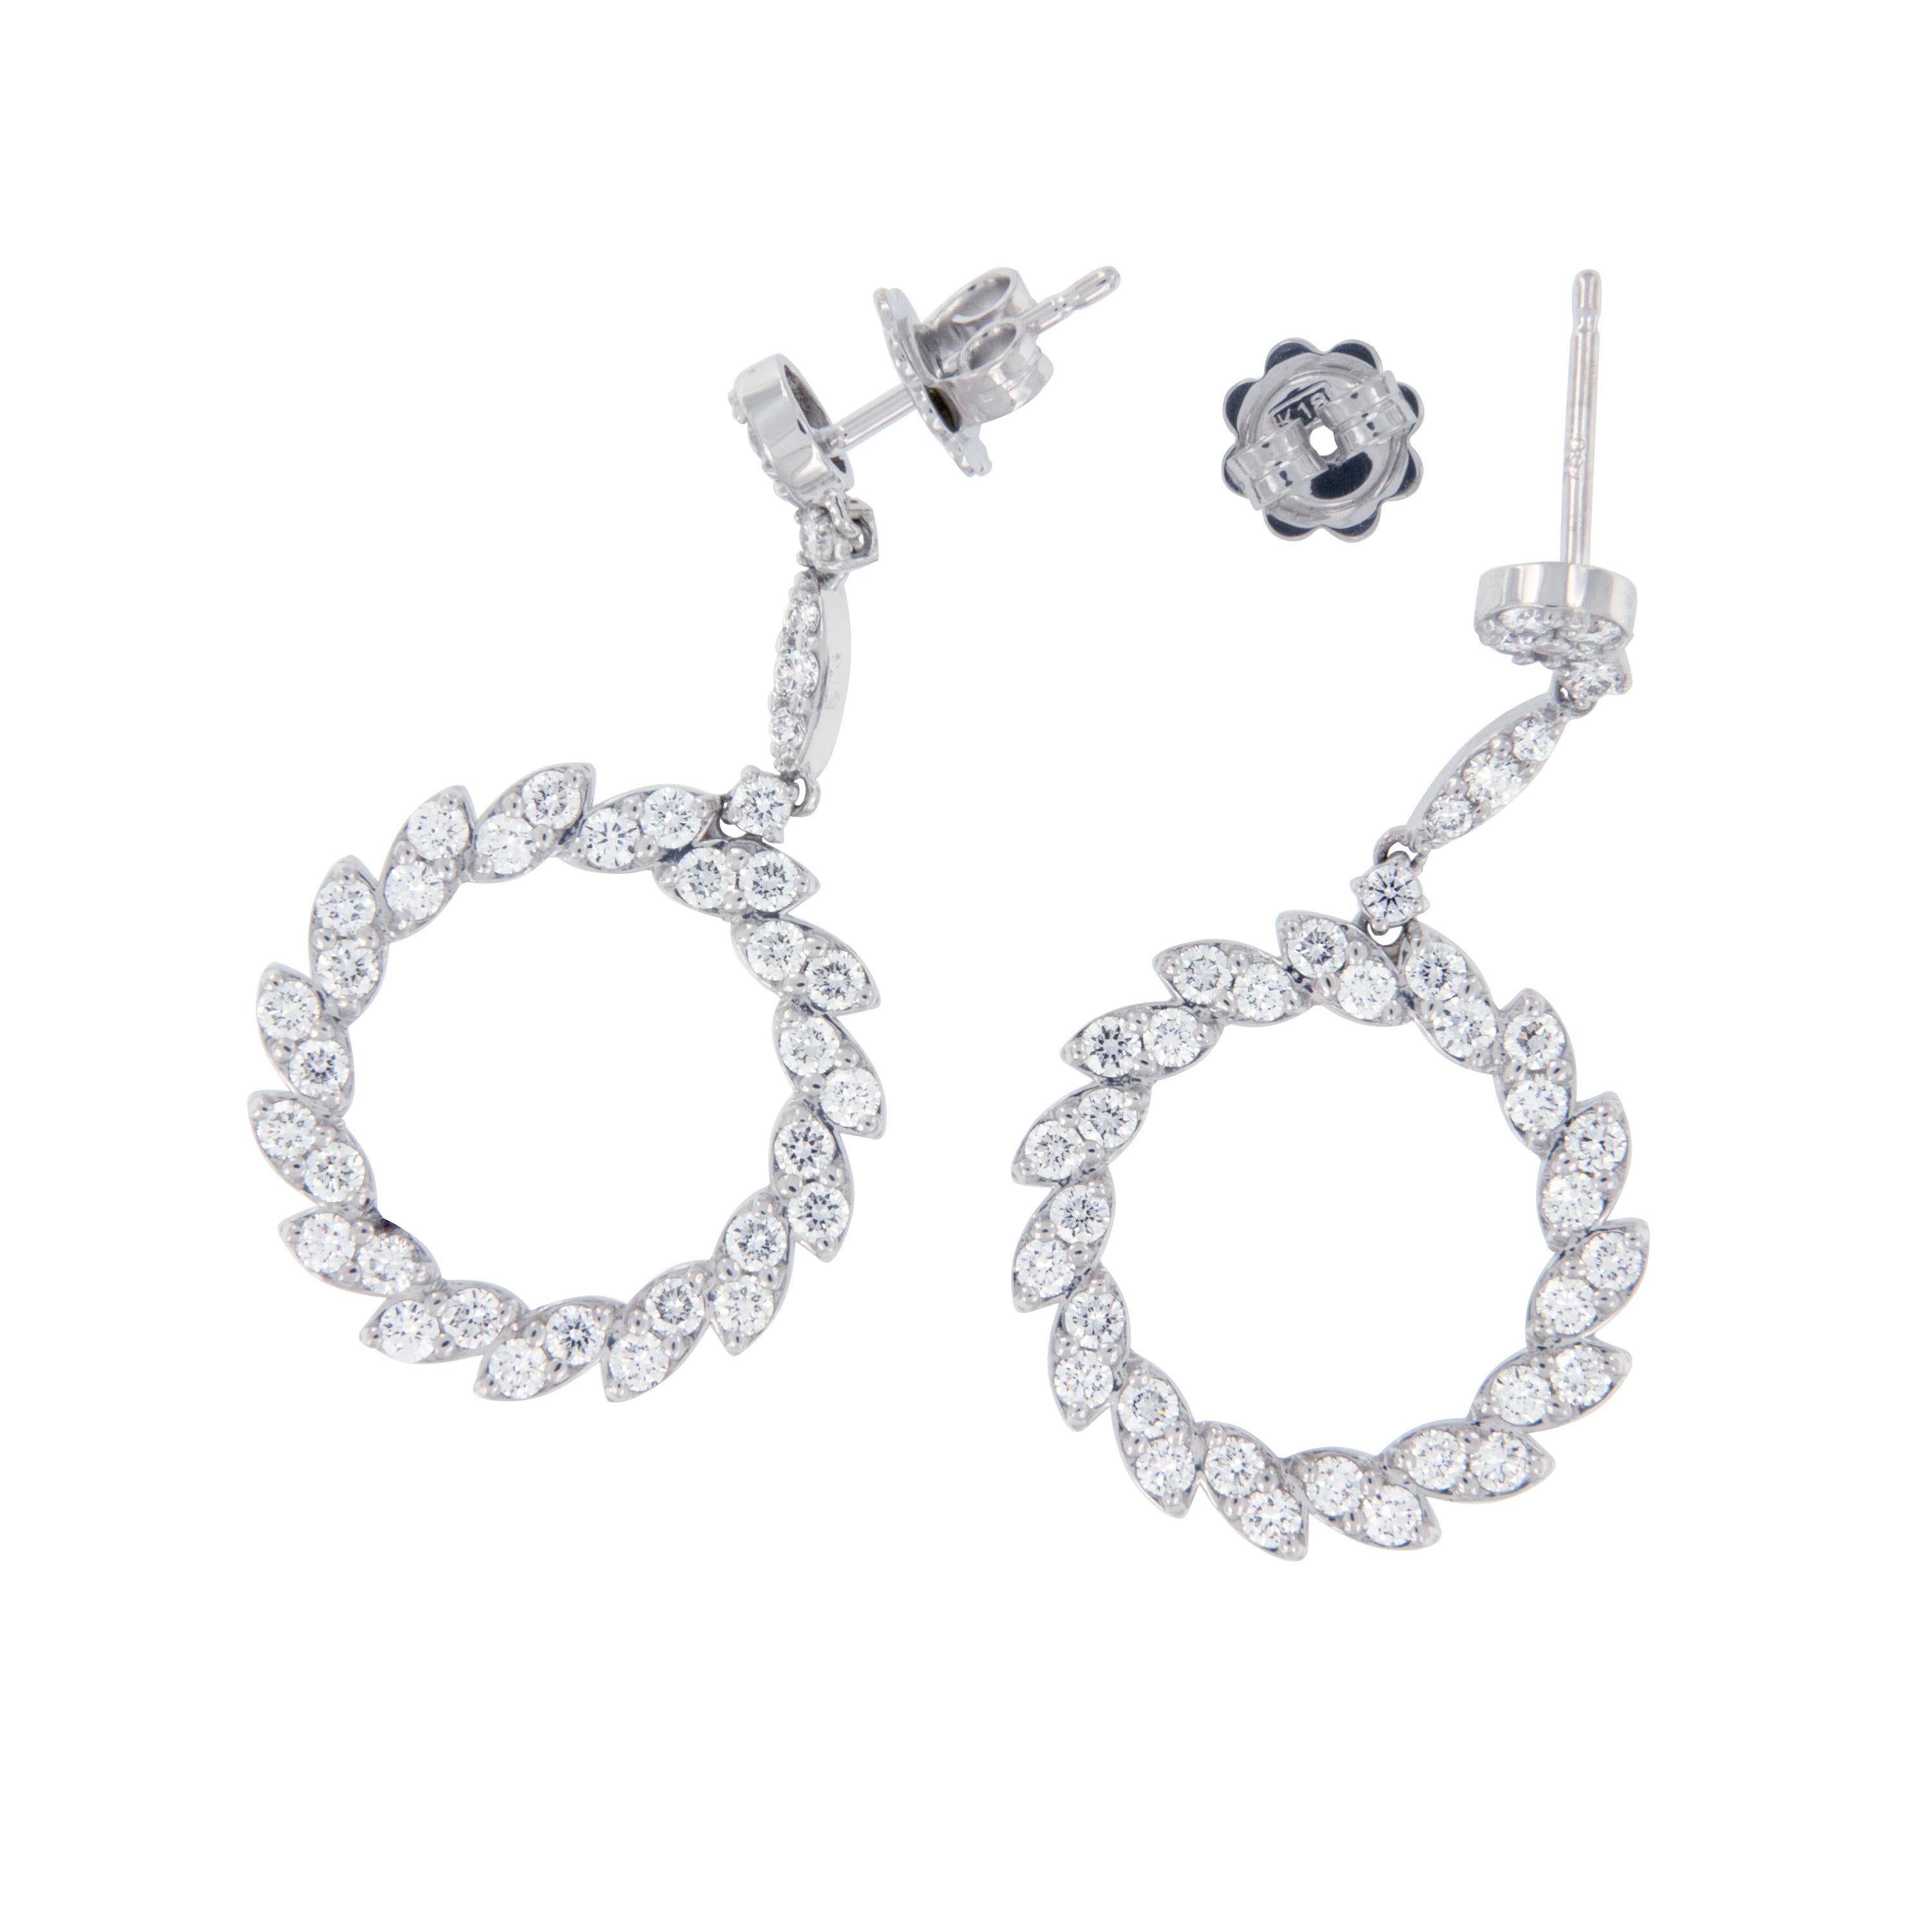 Created in refreshing 18 karat white gold, these drop earrings with 2.15 Cttw VS clarity, F-G colored round brilliant cut diamonds are set in marquise shapes for a stunning effect. The circle commonly represent unity, wholeness, and infinity. Wear